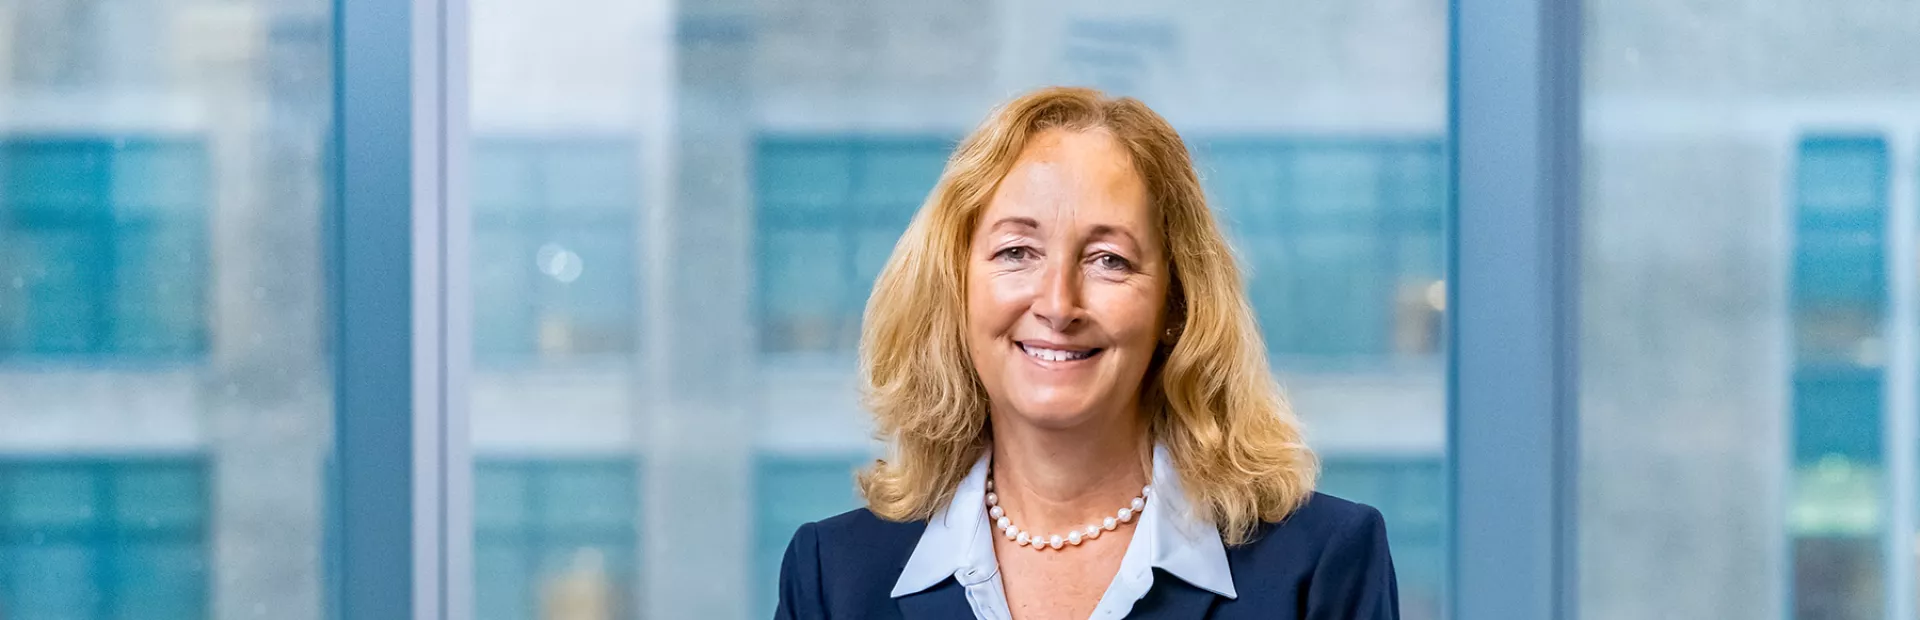 Fiona Marshall, President of the Novartis Institutes for BioMedical Research